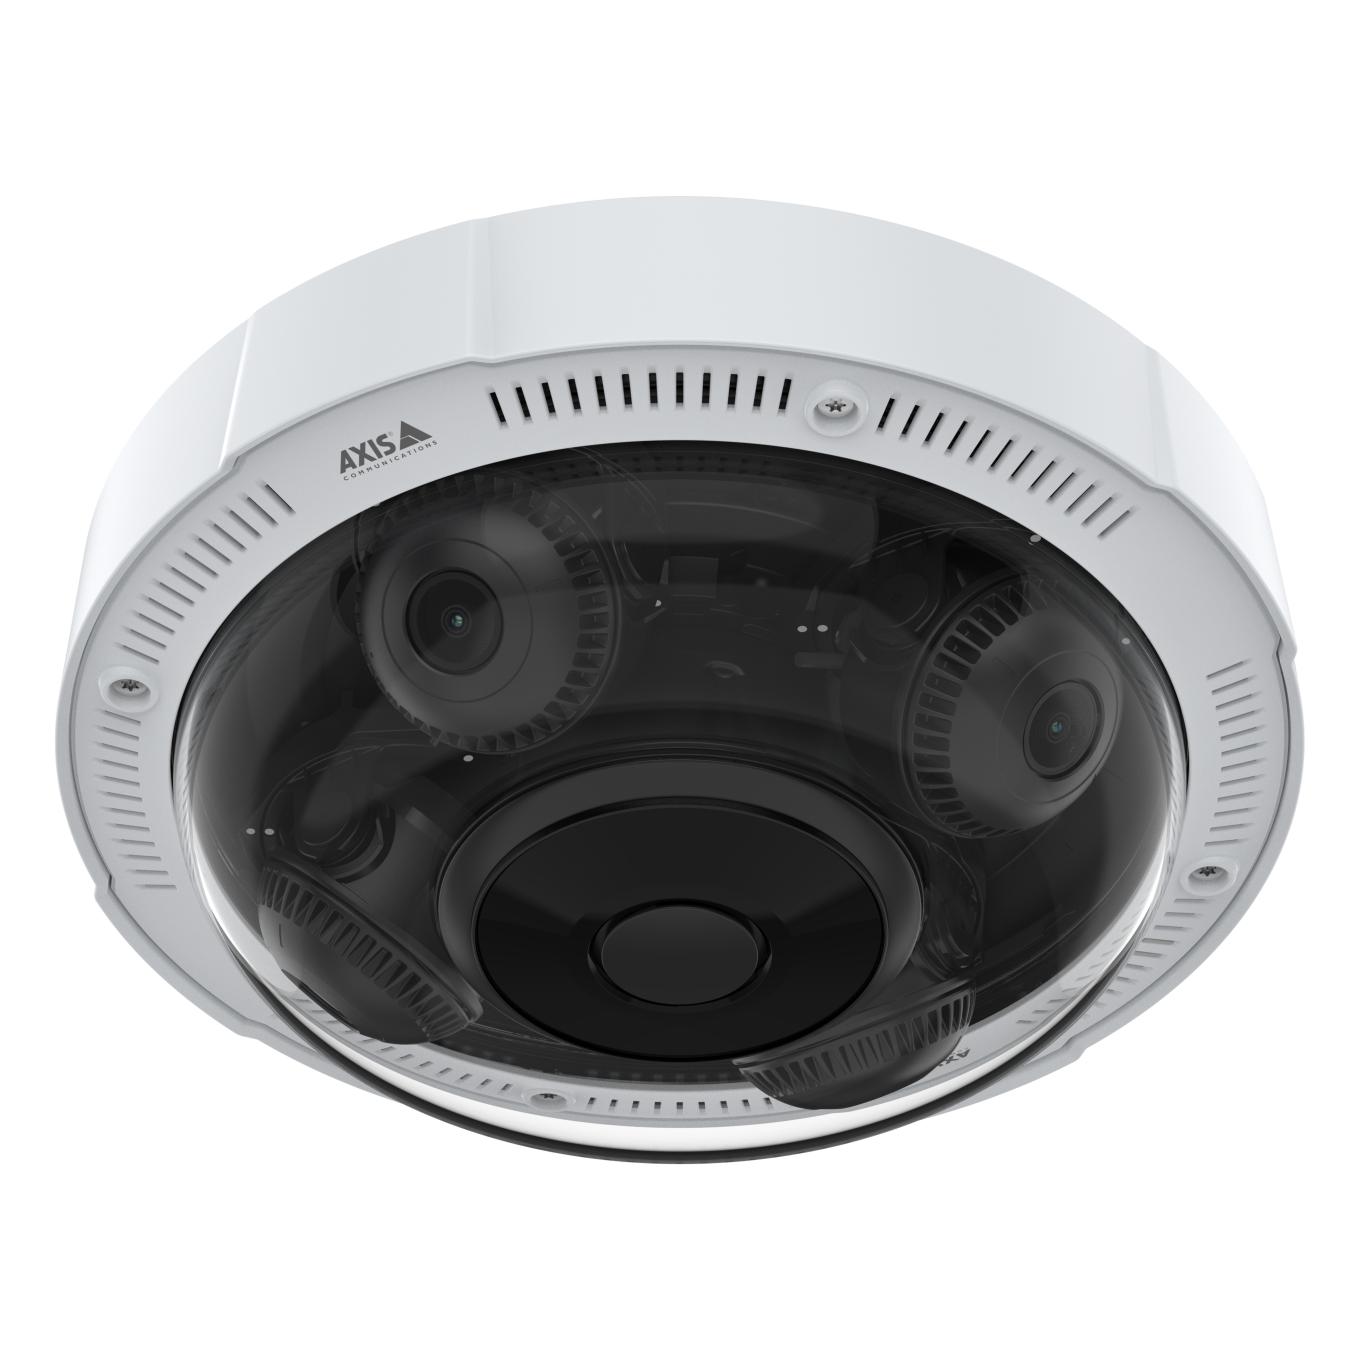 AXIS P3737-PLE Panoramic Camera | Axis Communications